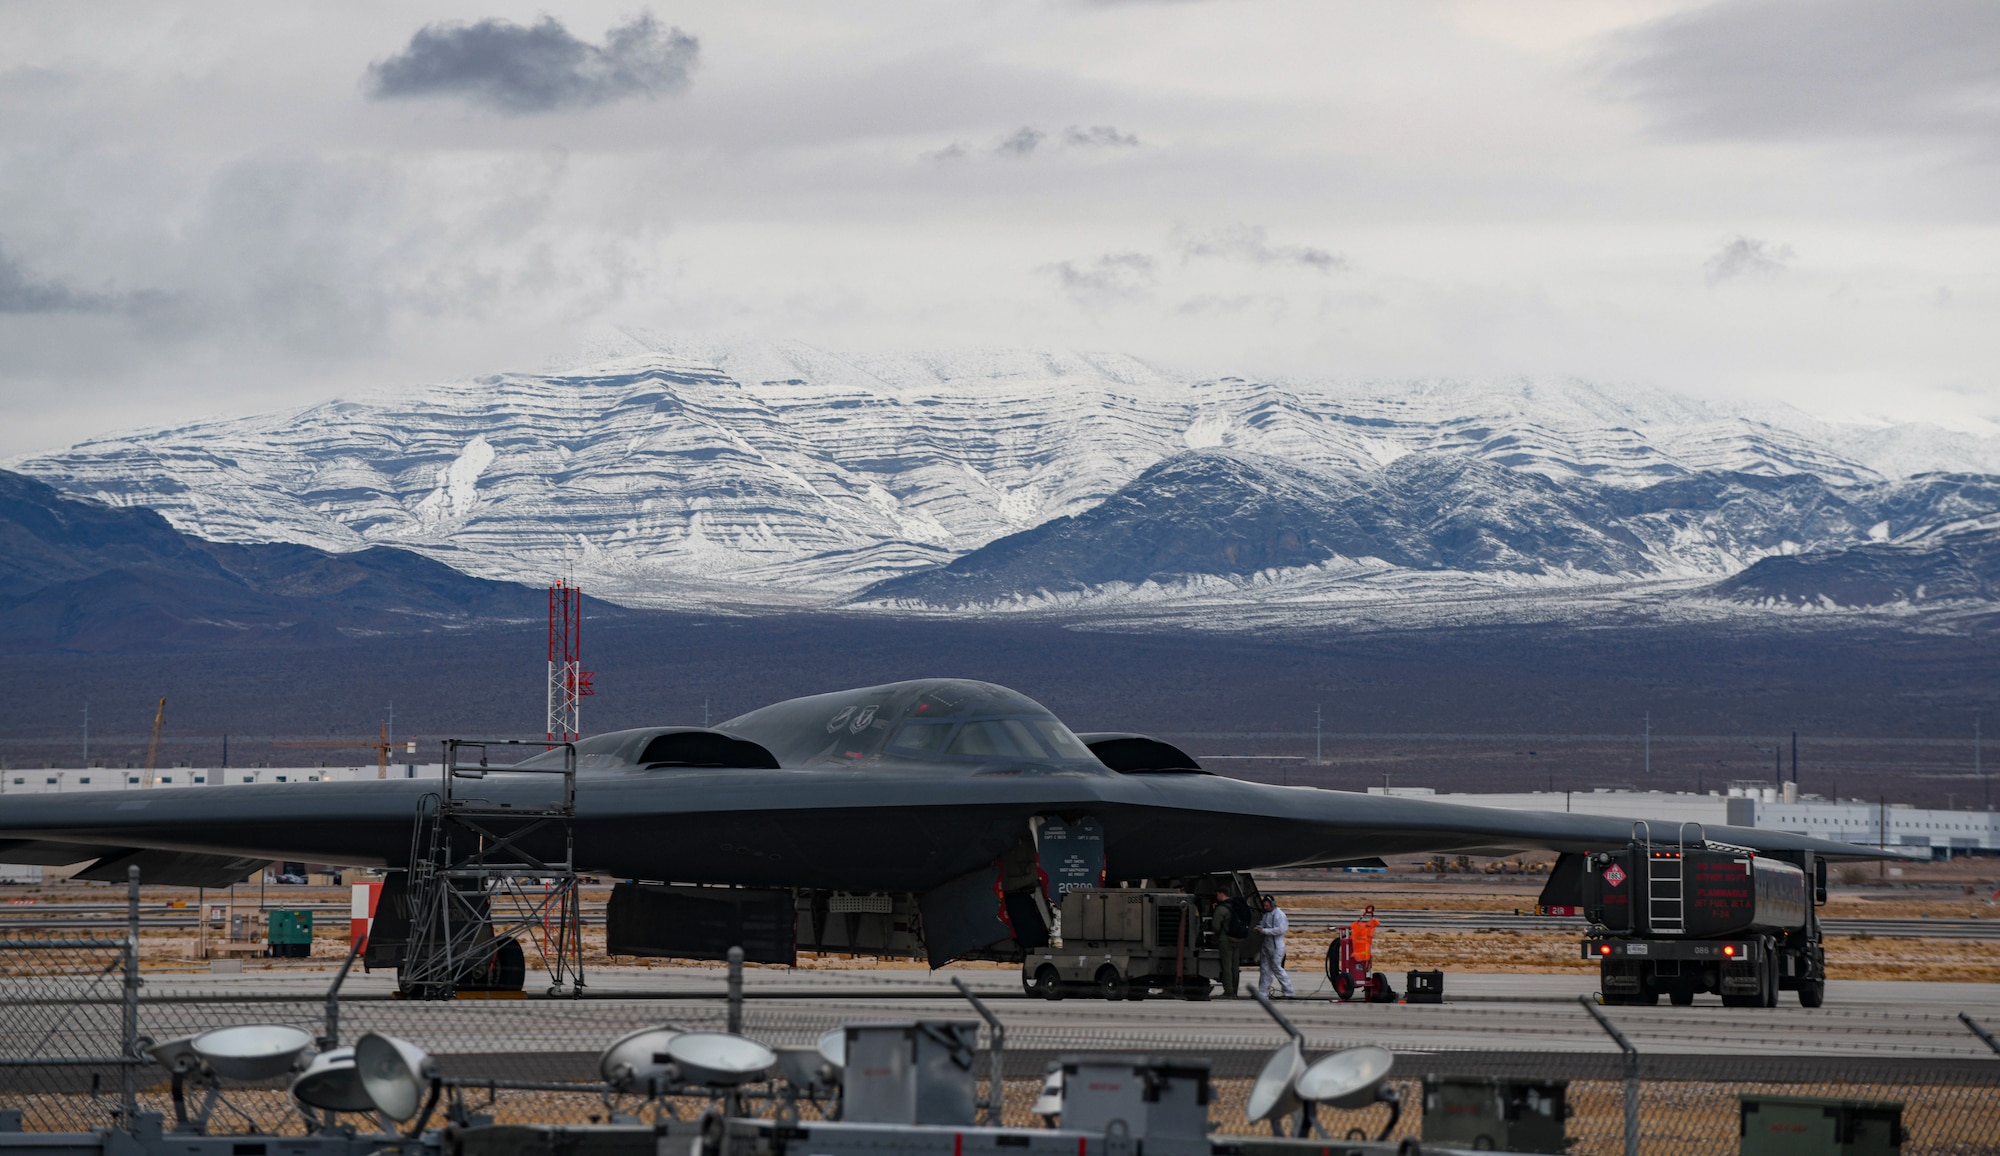 Team Whiteman Airmen prepare a B-2 Spirit Stealth Bomber for a training mission during Red Flag 21-1, at Nellis Air Force Base, Nevada, Jan. 26, 2021. Team Whiteman brought approximately a hundred Airmen to participate in the large force exercise and to be the lead Wing. As the lead Wing, RF 21-1 enables Team Whiteman to maintain a high state of readiness and proficiency, while validating their always-ready global strike capability. (U.S. Air Force photo by Staff Sgt. Sadie Colbert)